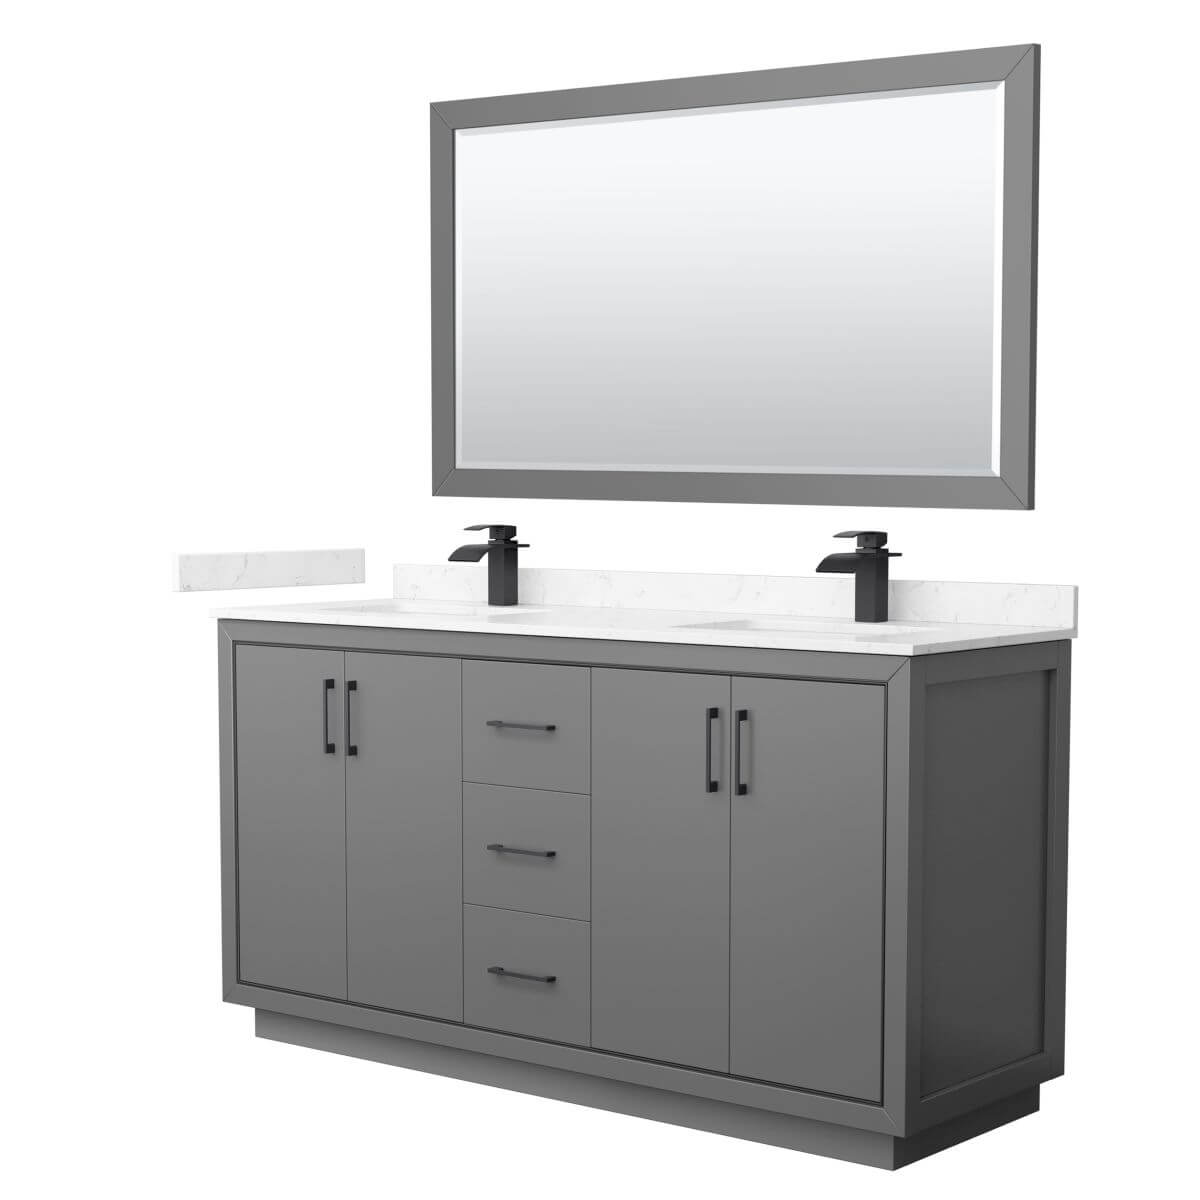 Wyndham Collection WCF111166DGBC2UNSM58 Icon 66 inch Double Bathroom Vanity in Dark Gray with Carrara Cultured Marble Countertop, Undermount Square Sinks, Matte Black Trim and 58 Inch Mirror